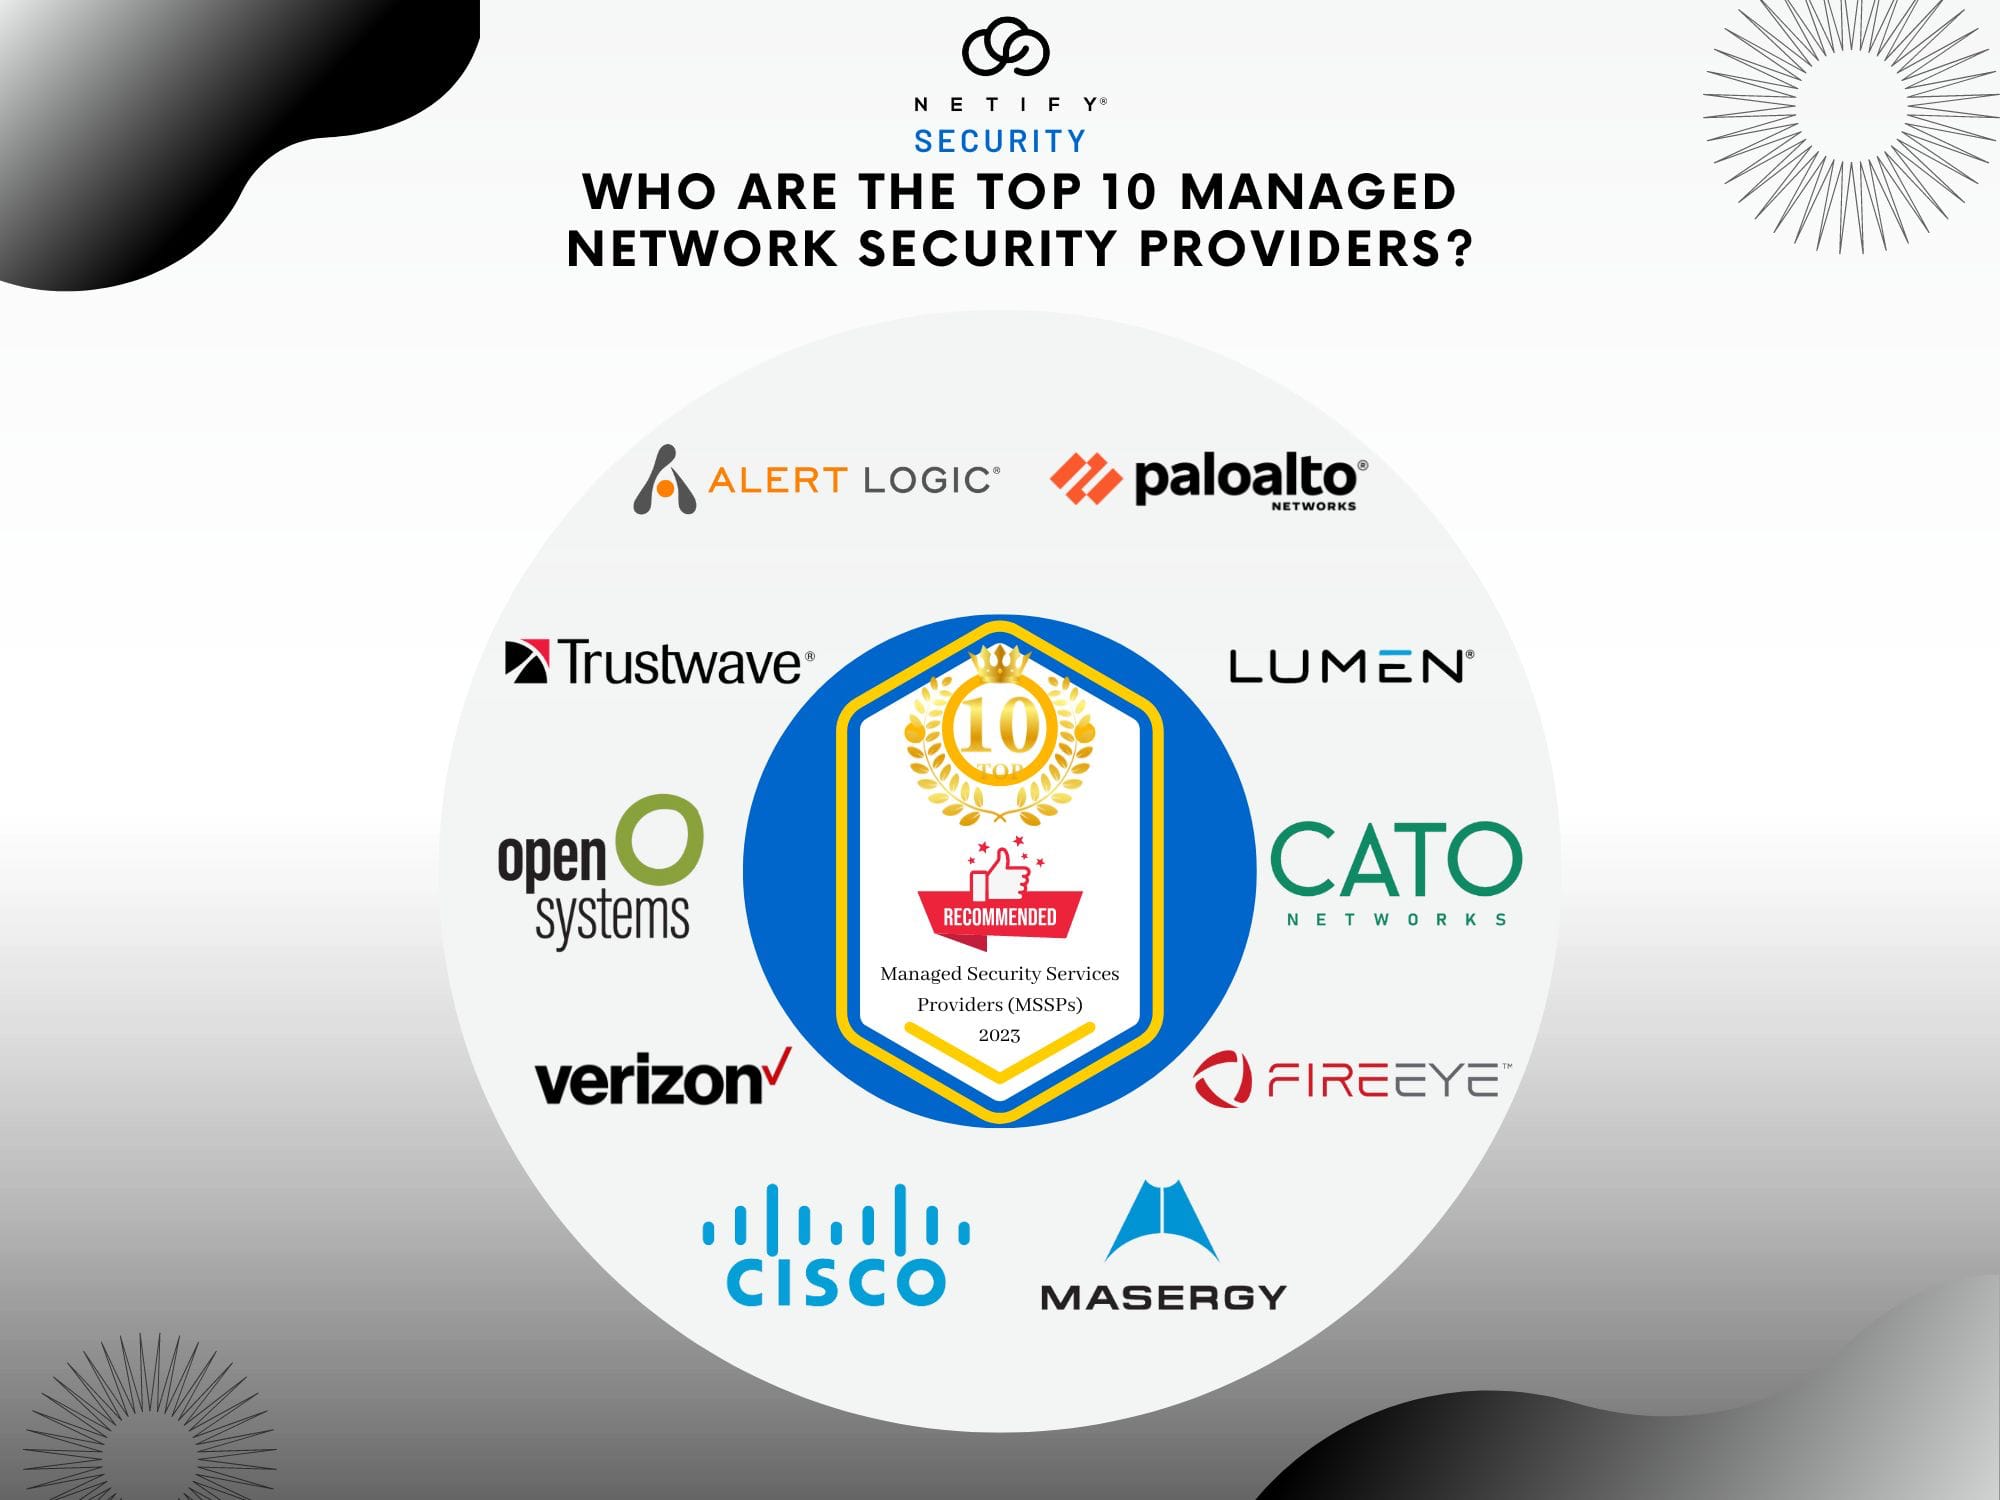 Who are the Top 10 Managed Network Security Providers?